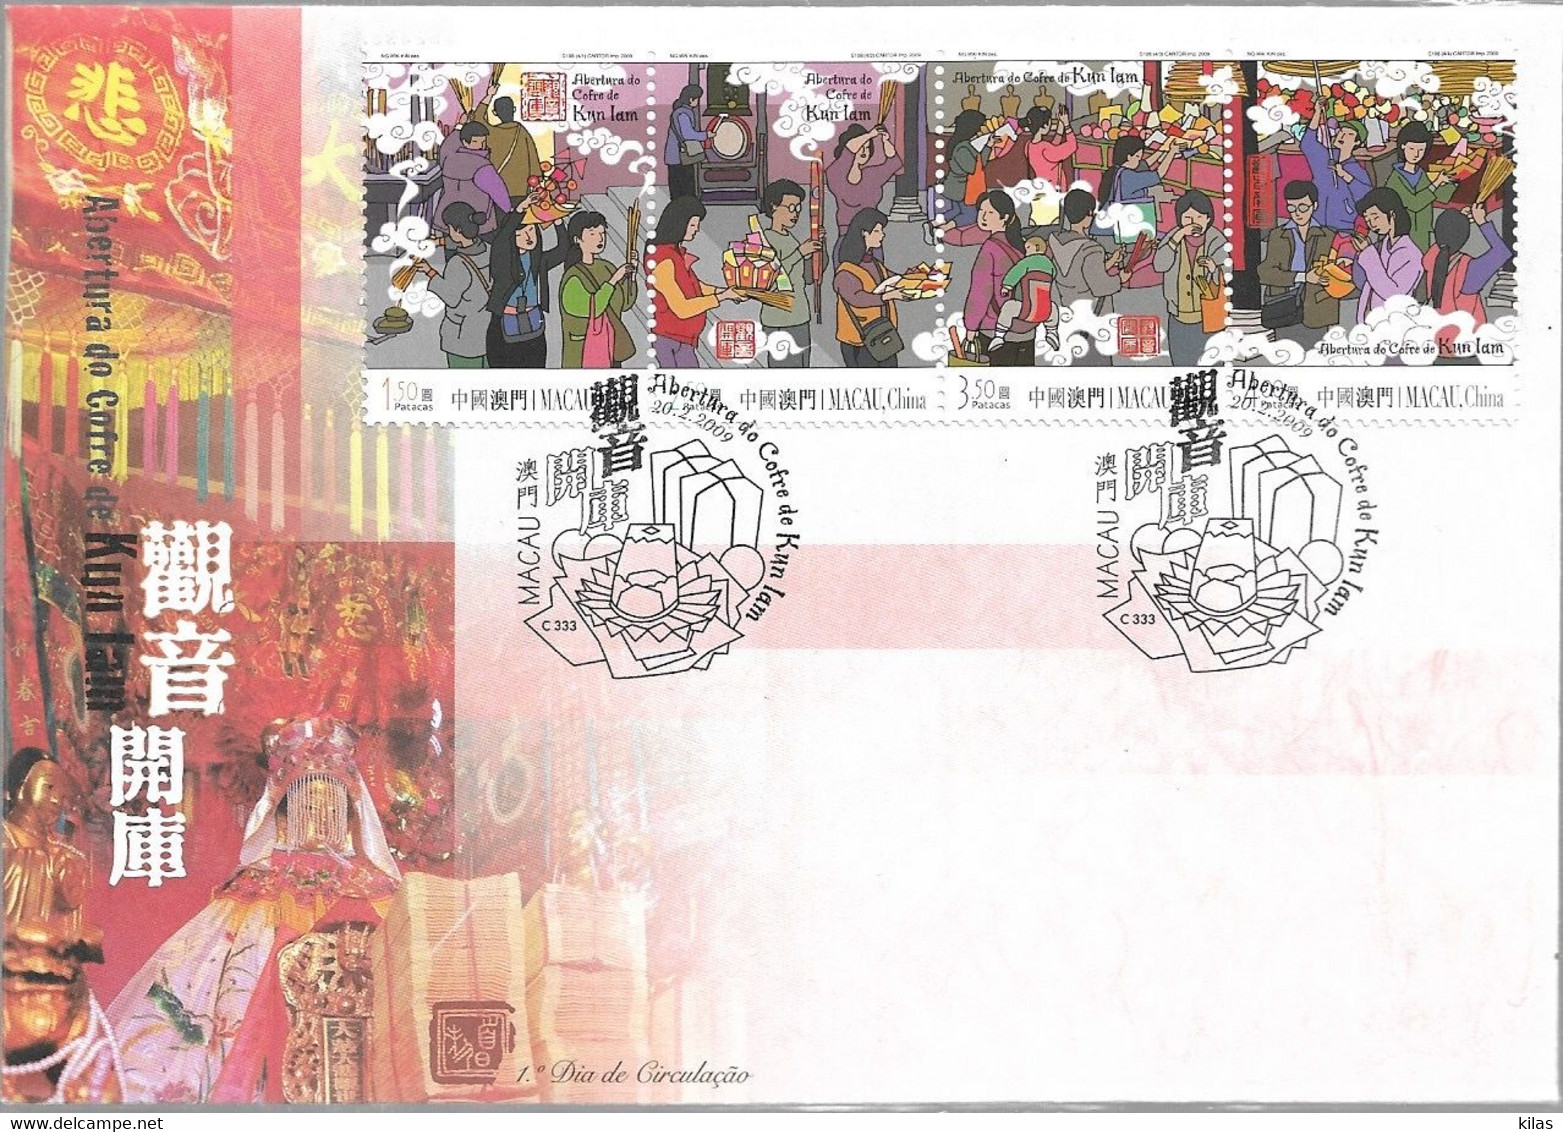 MACAU 2009 OPENING OF THE TEMPLE OF KUM IAM Fdc  MNH - FDC